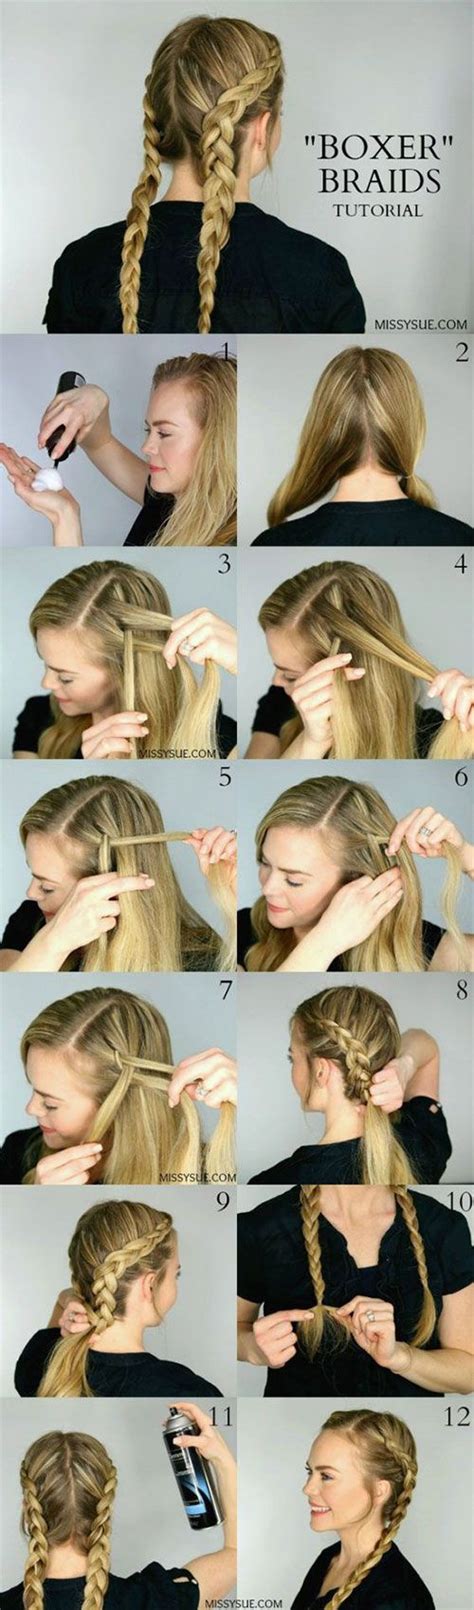 Step By Step Boxer Braid Tutorial For Beginners And Learners 2016 Dos